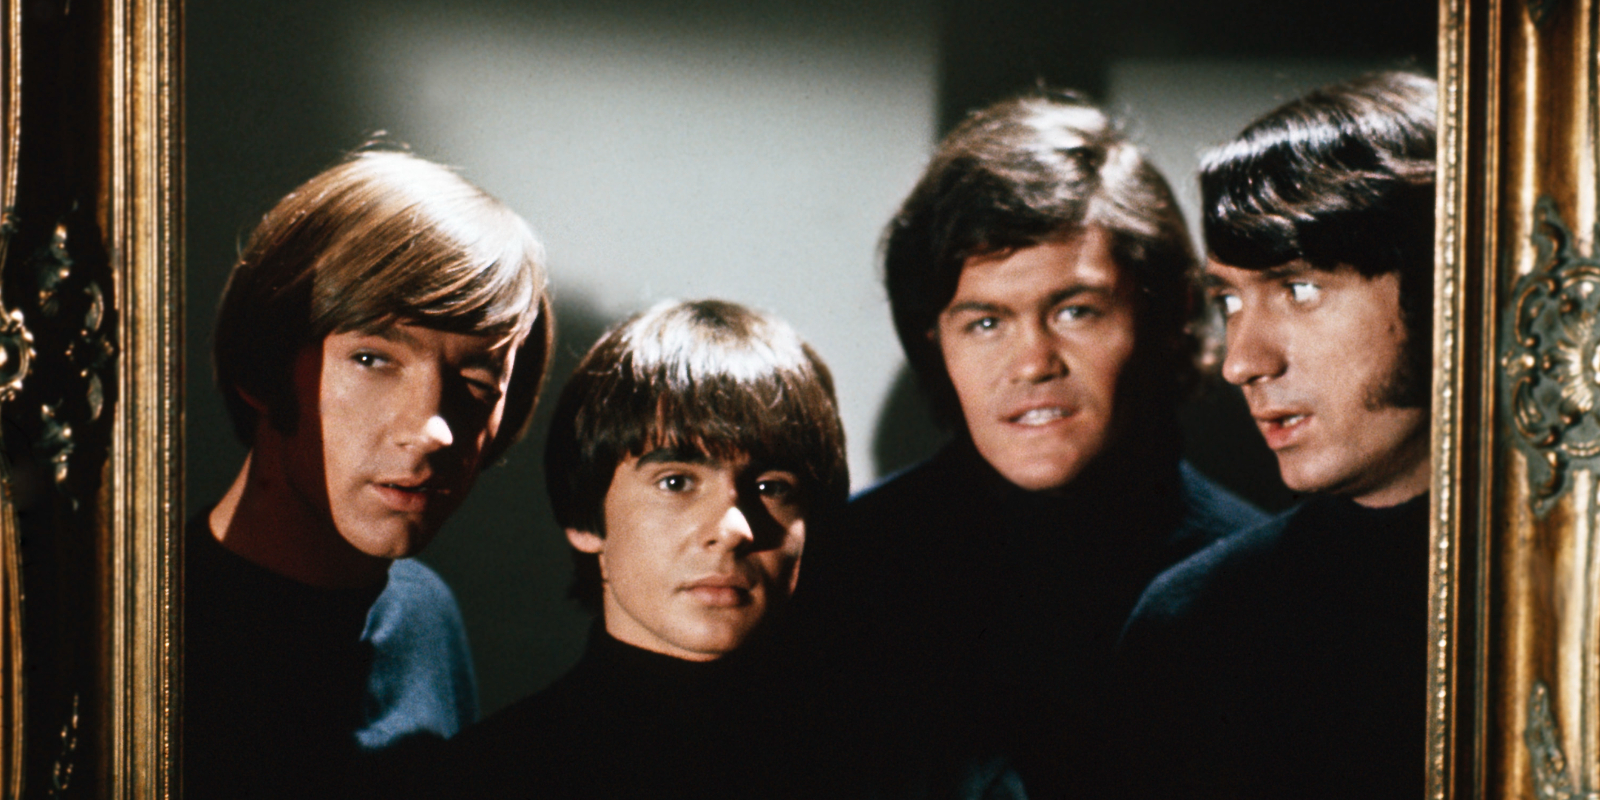 Peter Tork, Davy Jones, Micky Dolenz, and Mike Nesmith on the set of 'The Monkees' television show in the late 1960s.